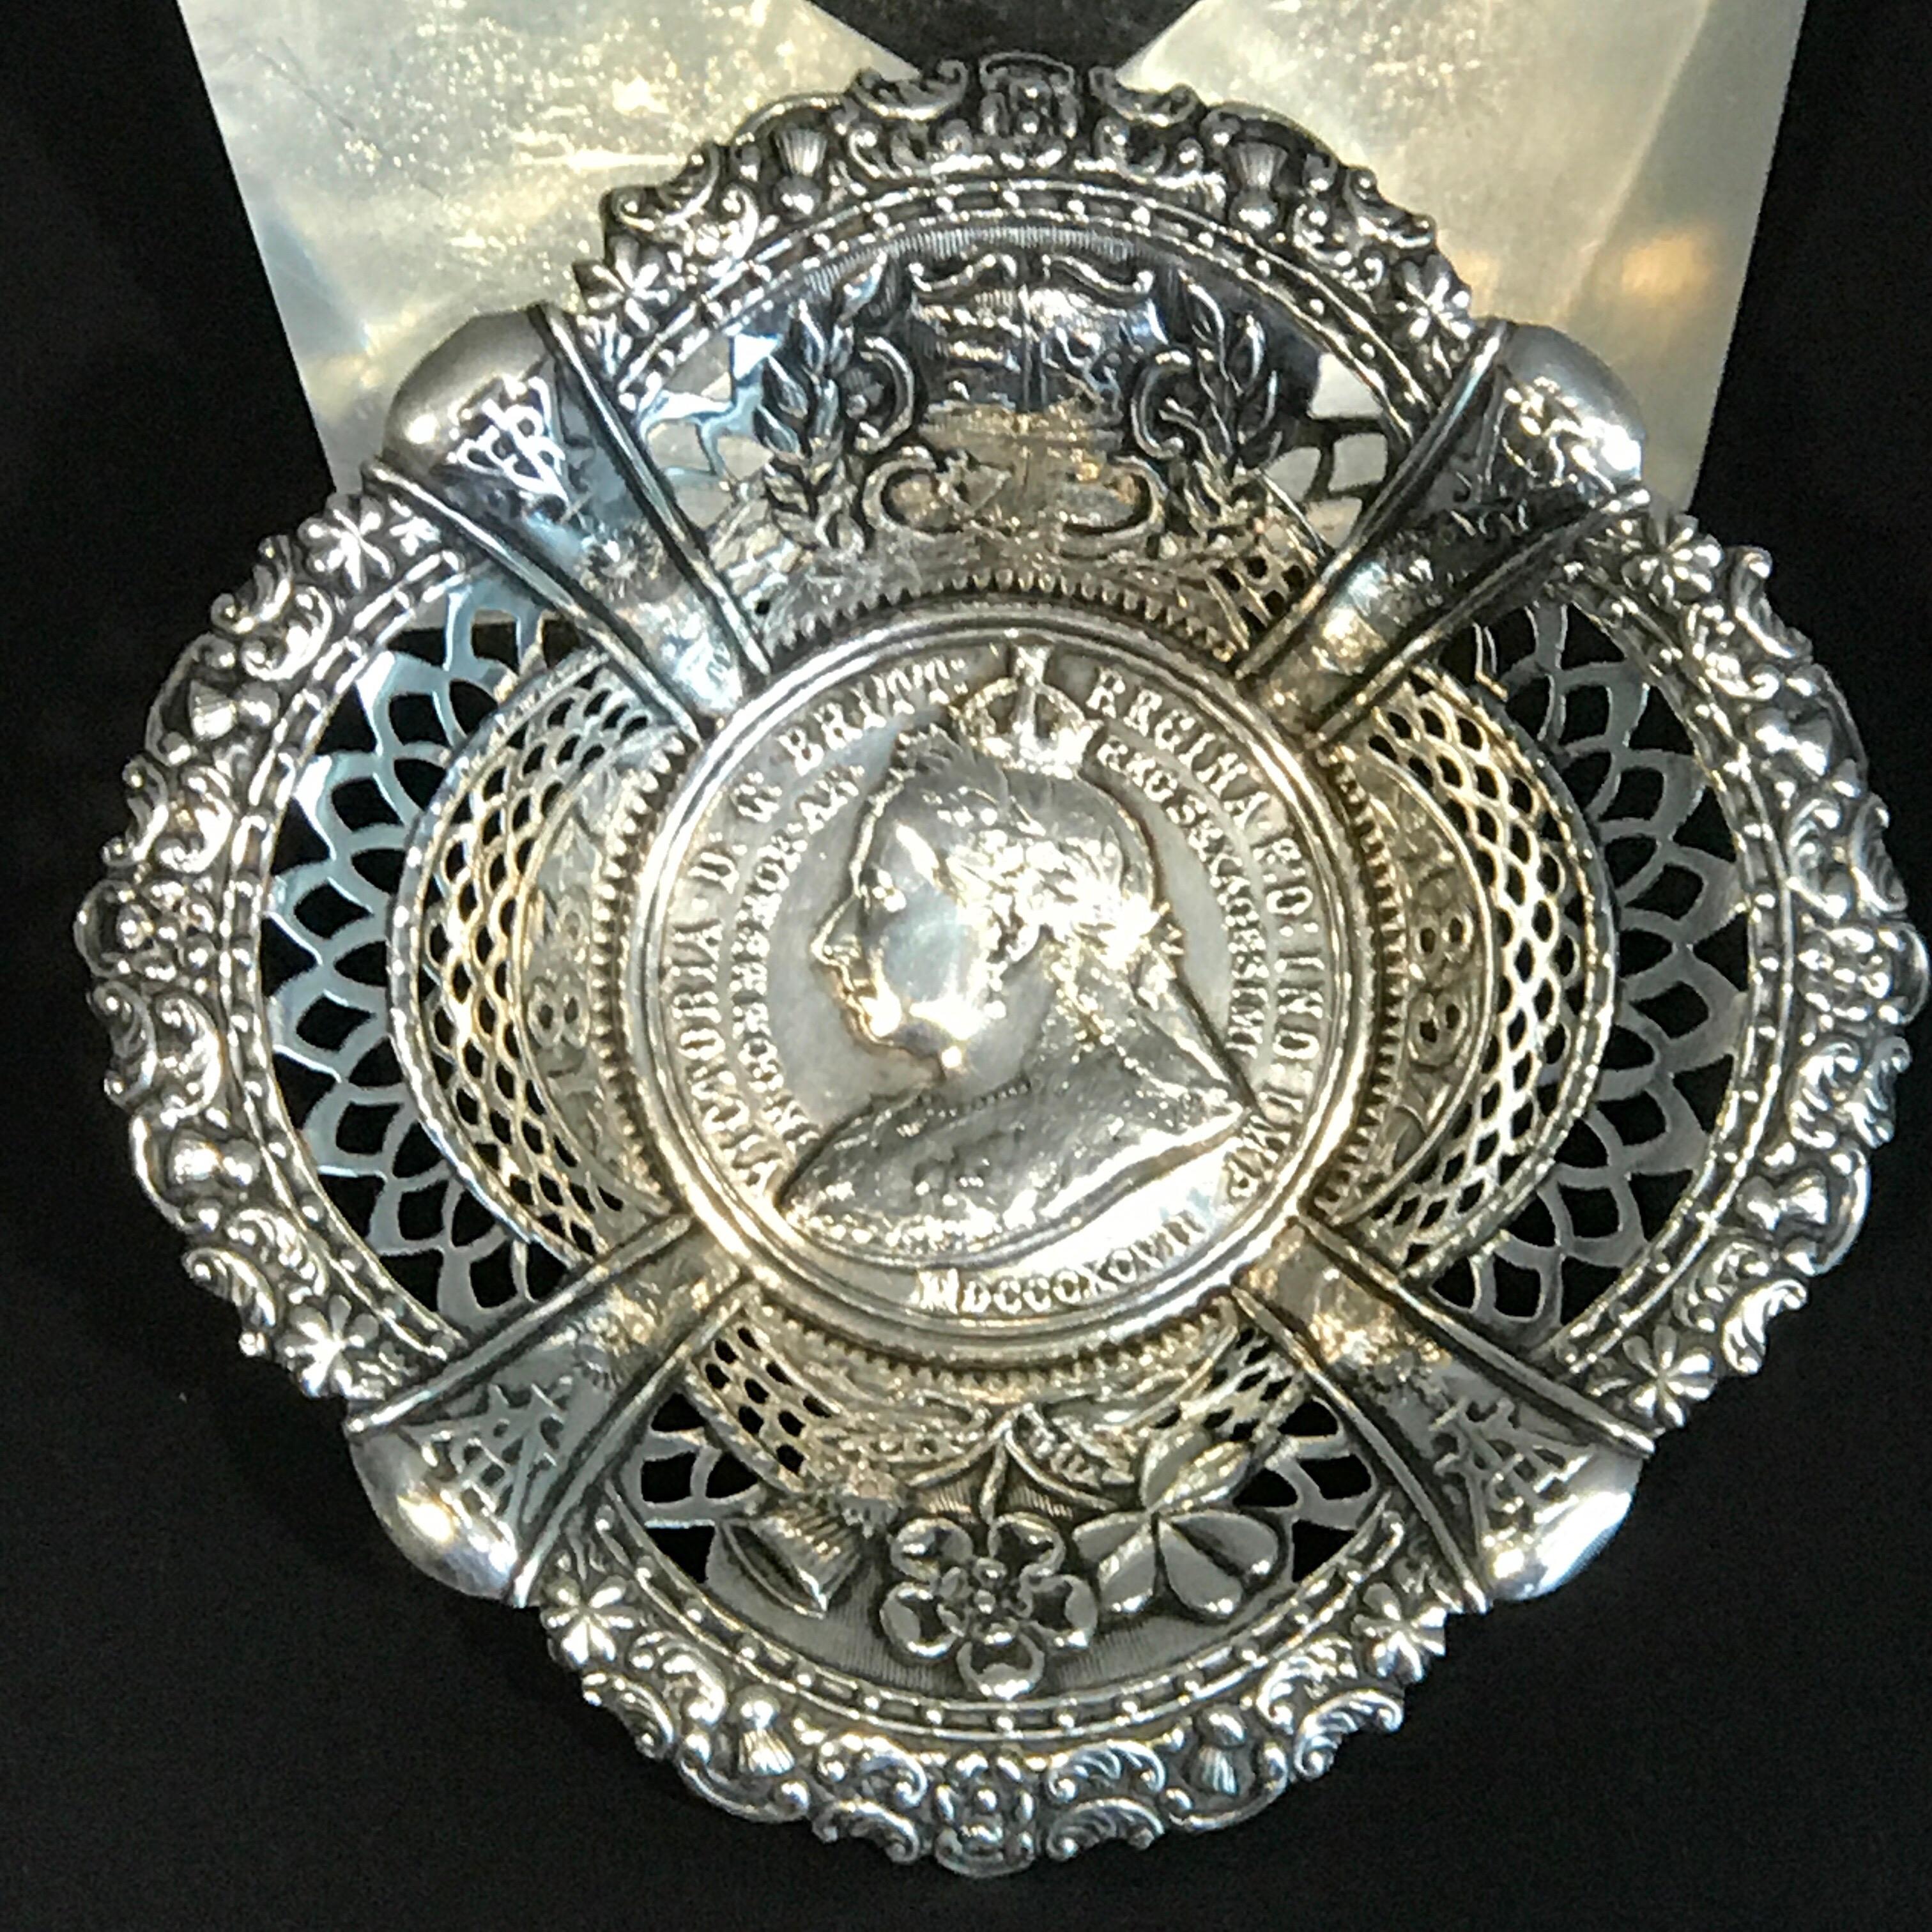 Queen Victoria’s diamond Jubilee sterling commemorative bowl
Fantastically intricate with center portrait, coat of arms, the year 1837, and a crest of the English rose, Scottish thistle and Irish Shamrock and the year 1897
Made by Crisford &